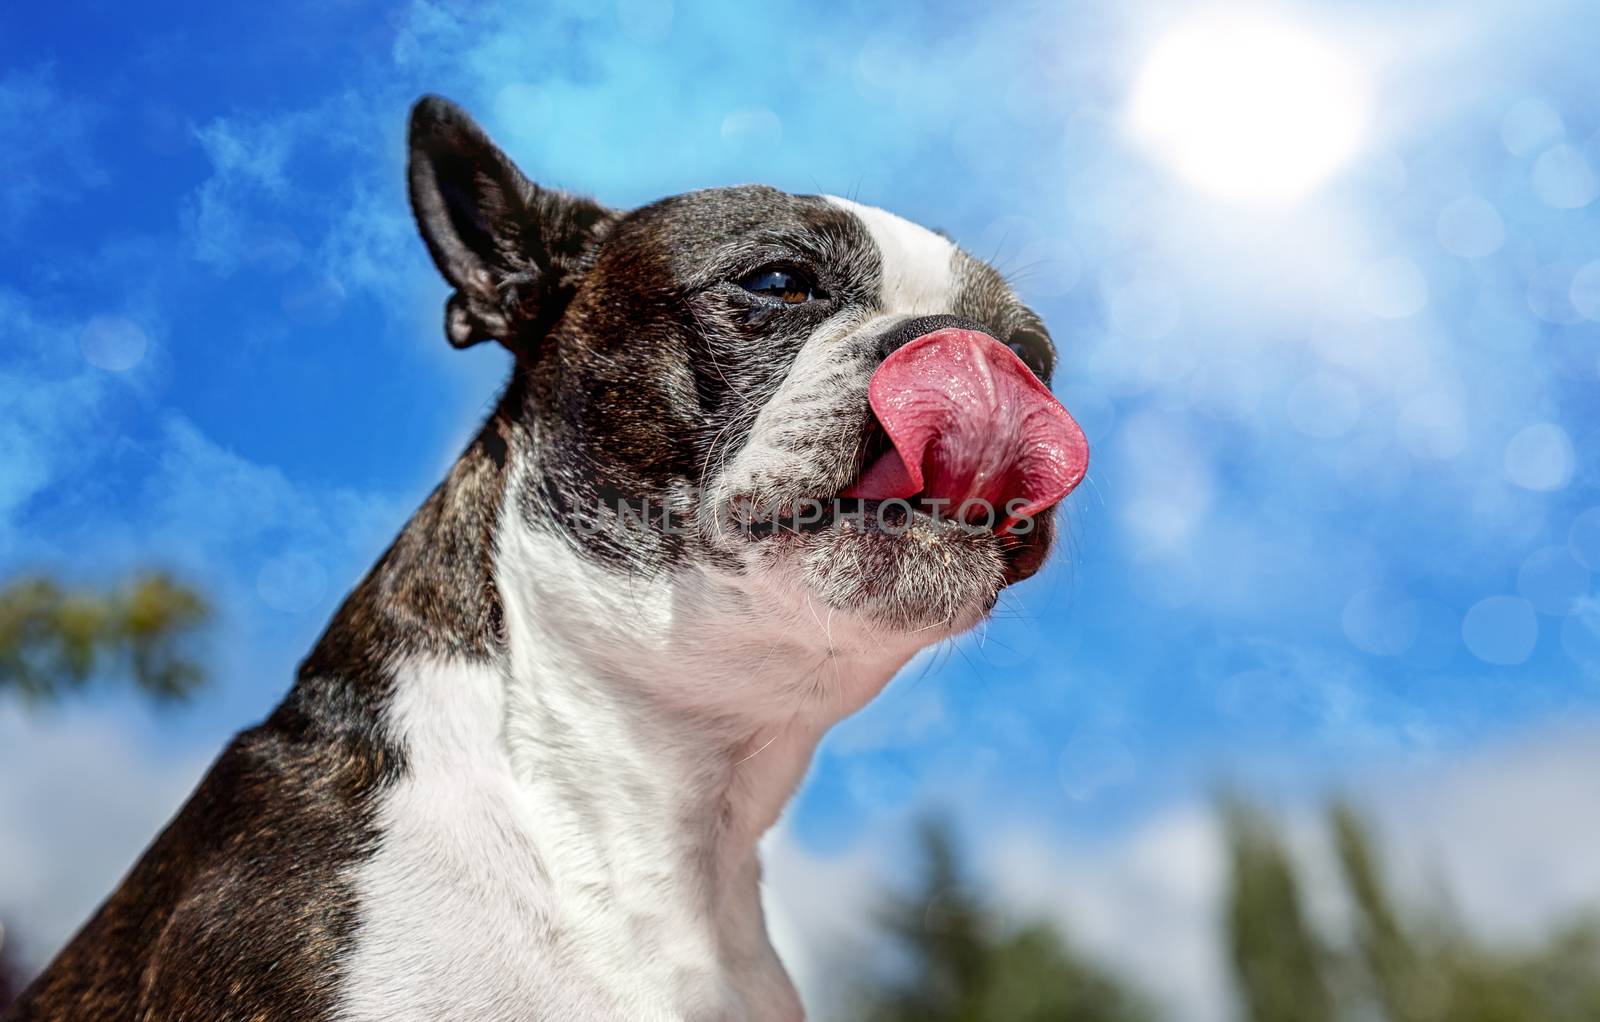 Boston Terrier Licking Chops On A Sunny Day by backyard_photography